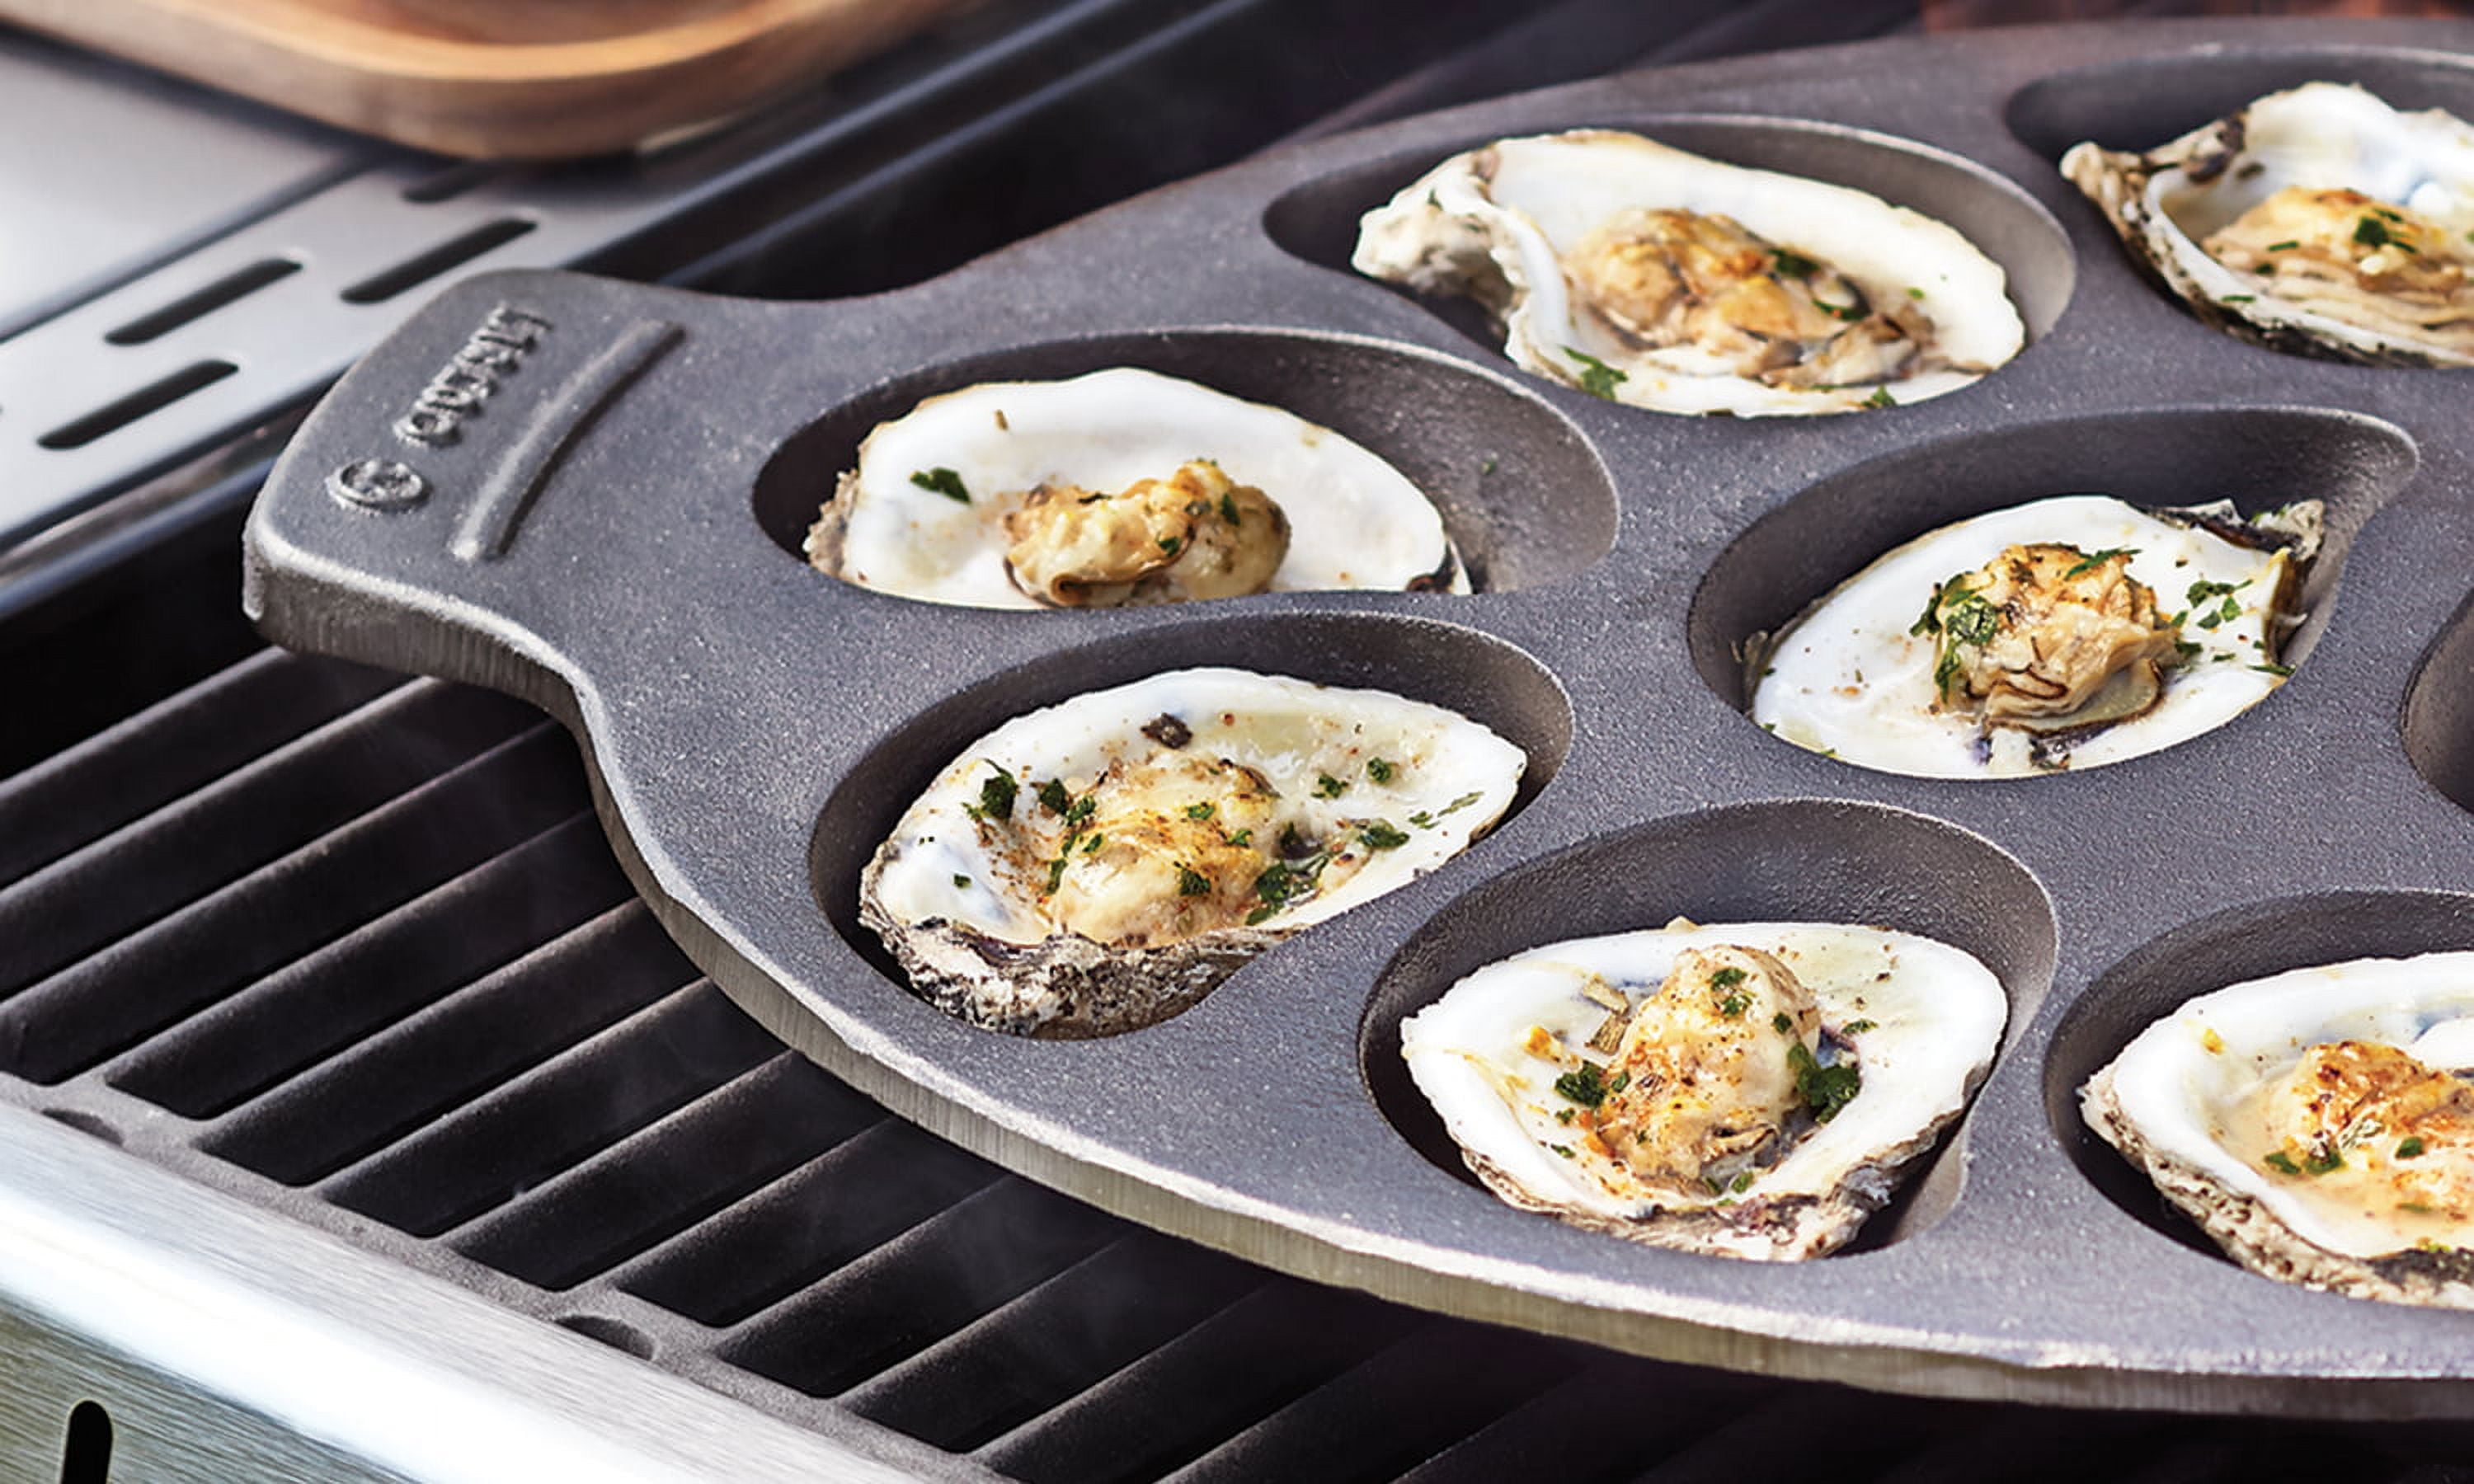 BAYOU CLASSIC Oyster Grill Pan Perfect For Grilling and Serving 12 Oysters  or Clams On The Half Shell 7413 - The Home Depot